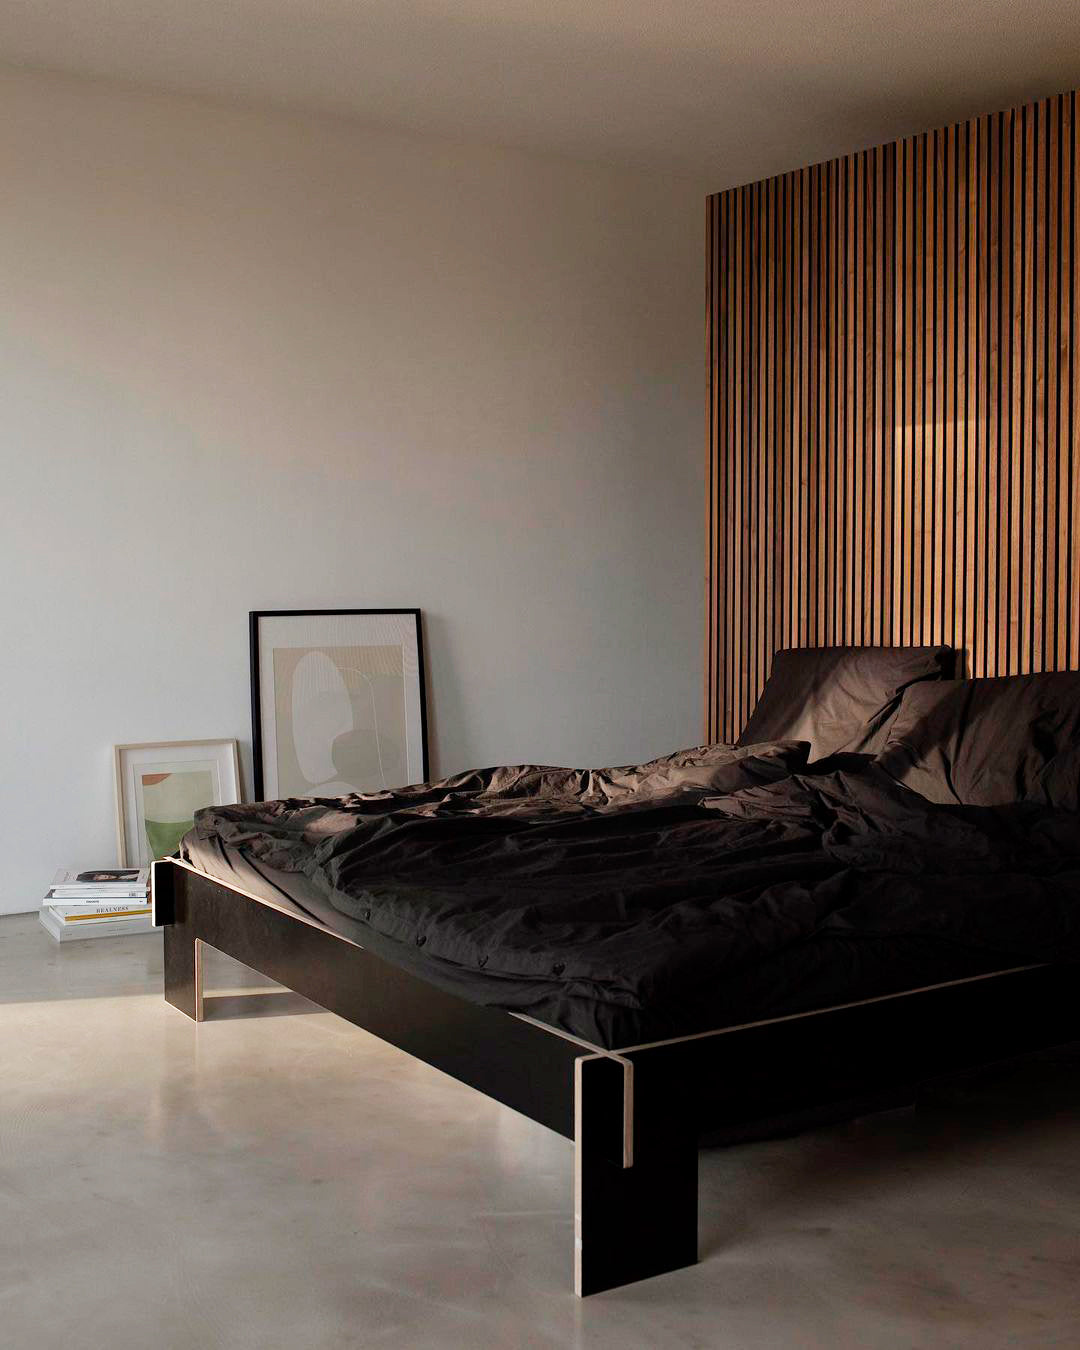 minimalist bedroom with dark bedding, oversized art frames and a vertical wood slat wall behind the bed